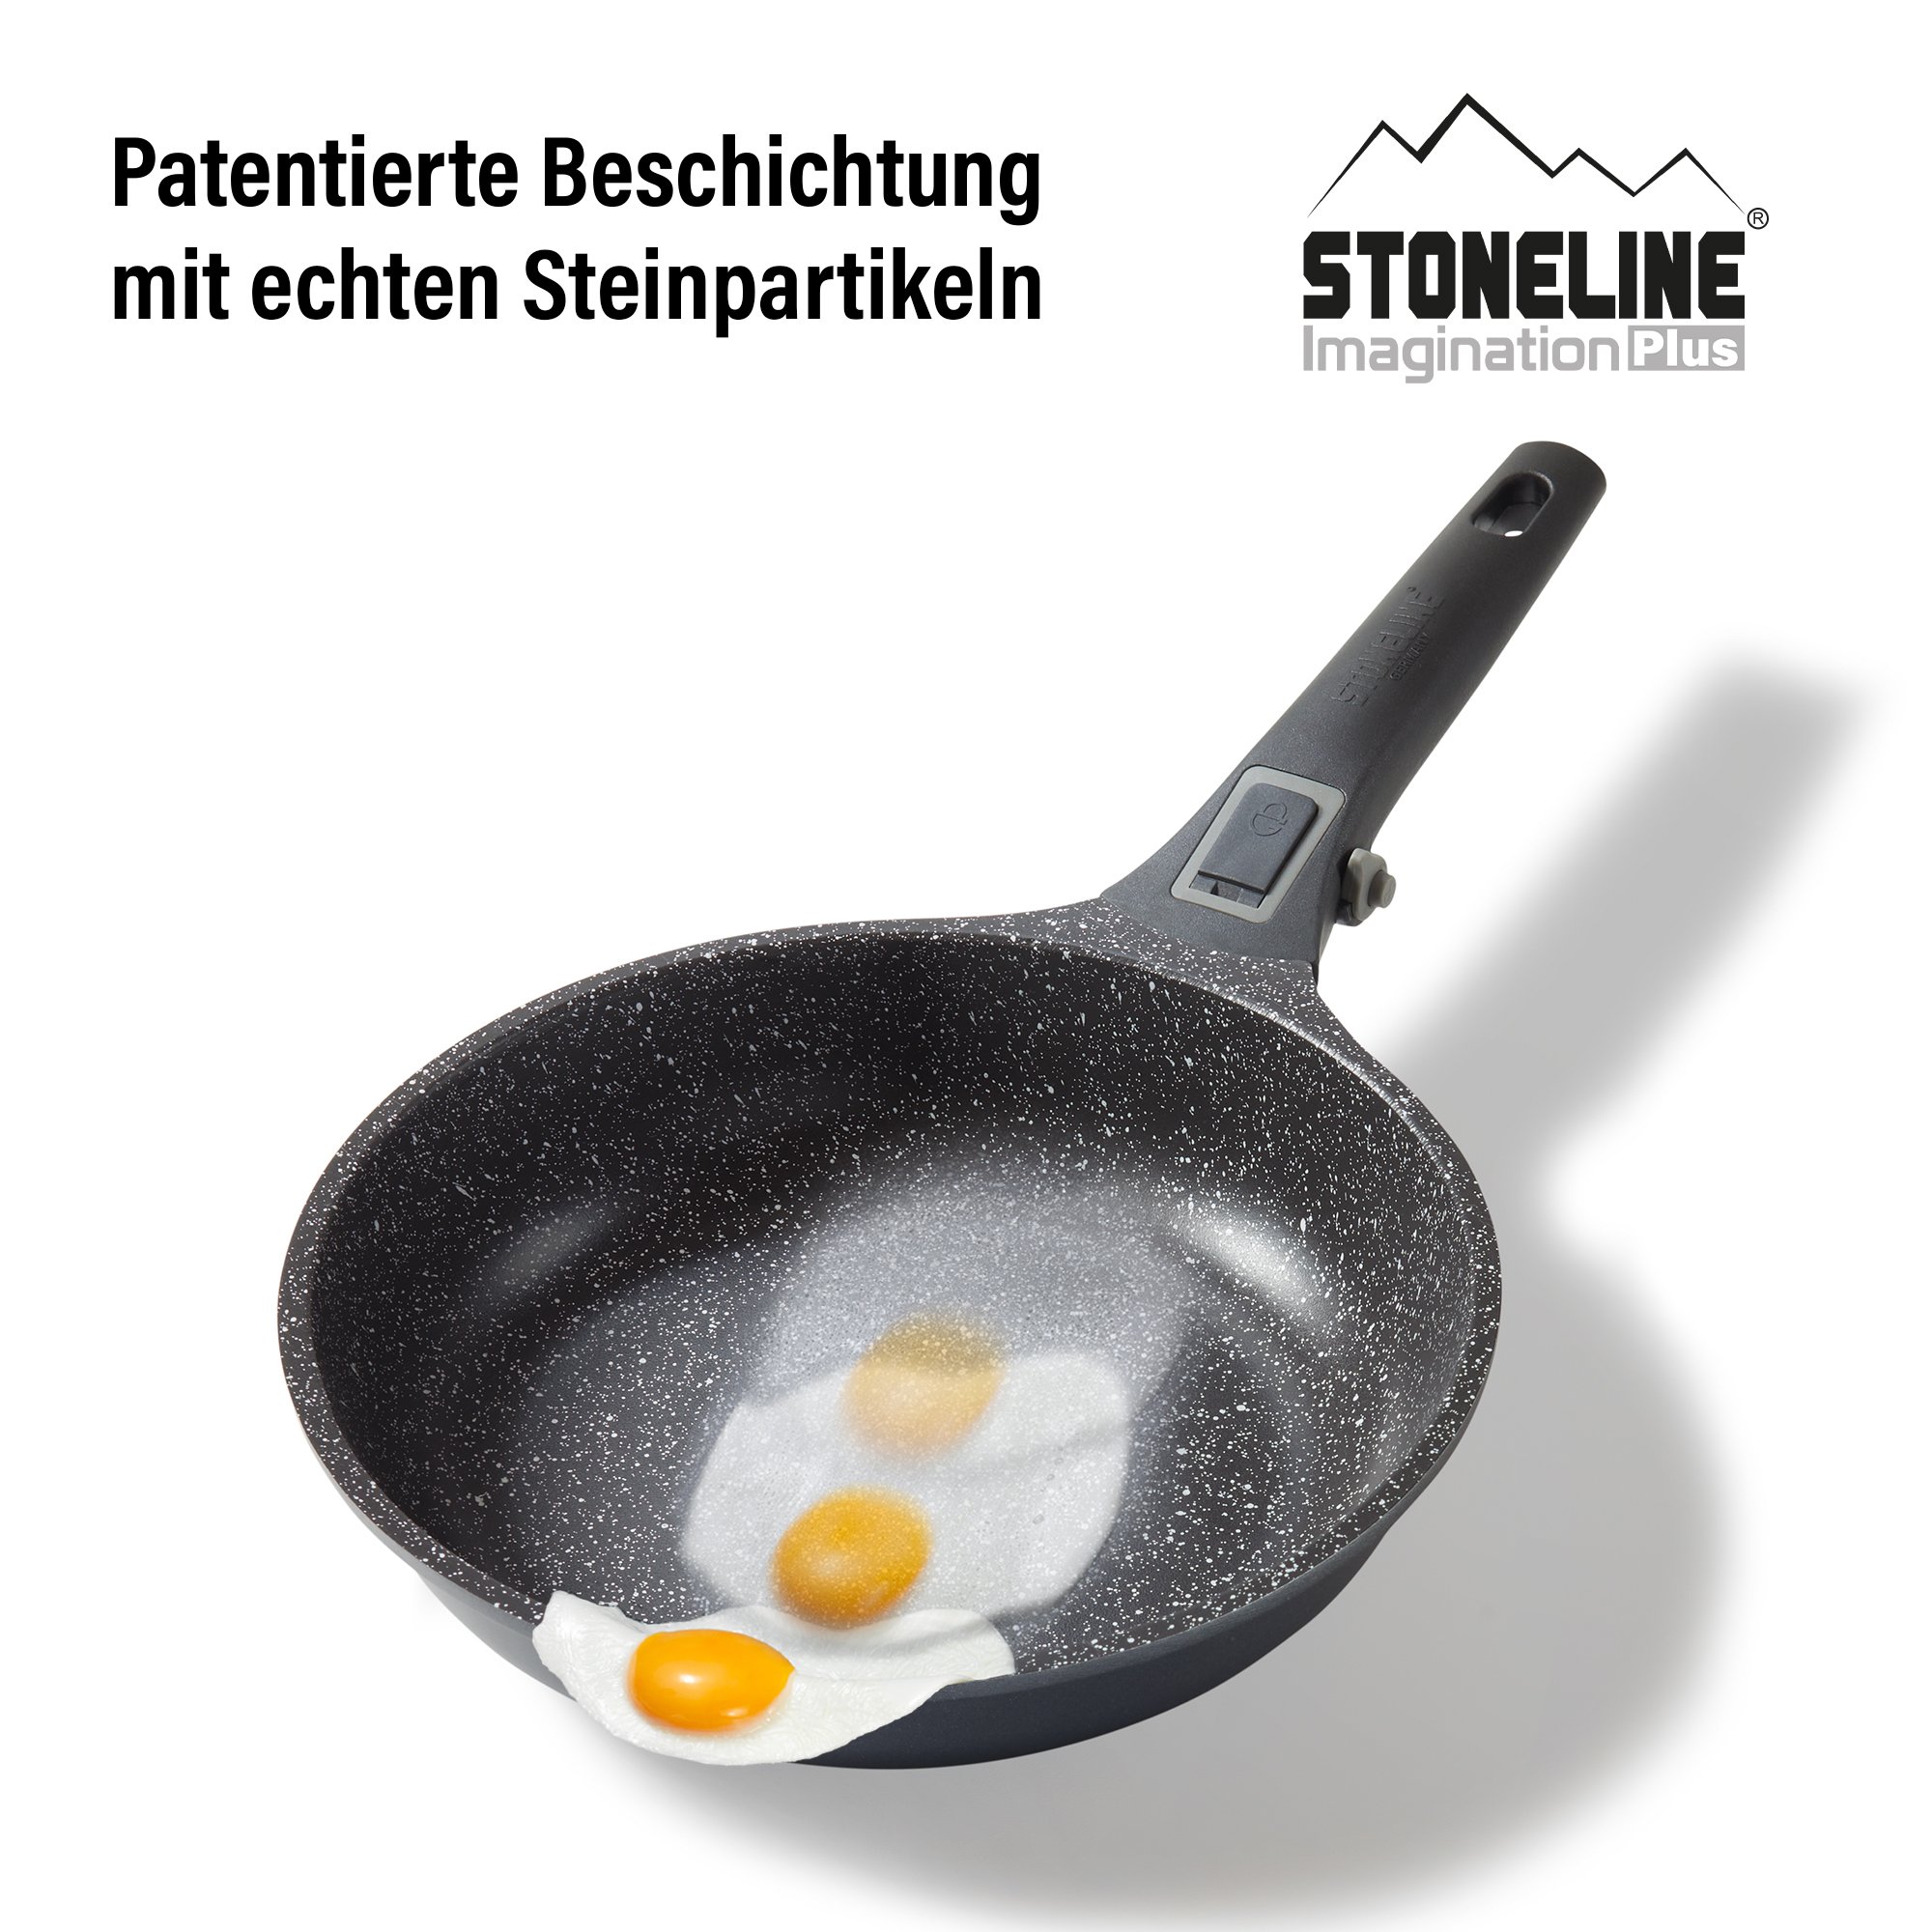 STONELINE® Imagination PLUS frying pan 24 cm, coated with removable handle, suitable for induction